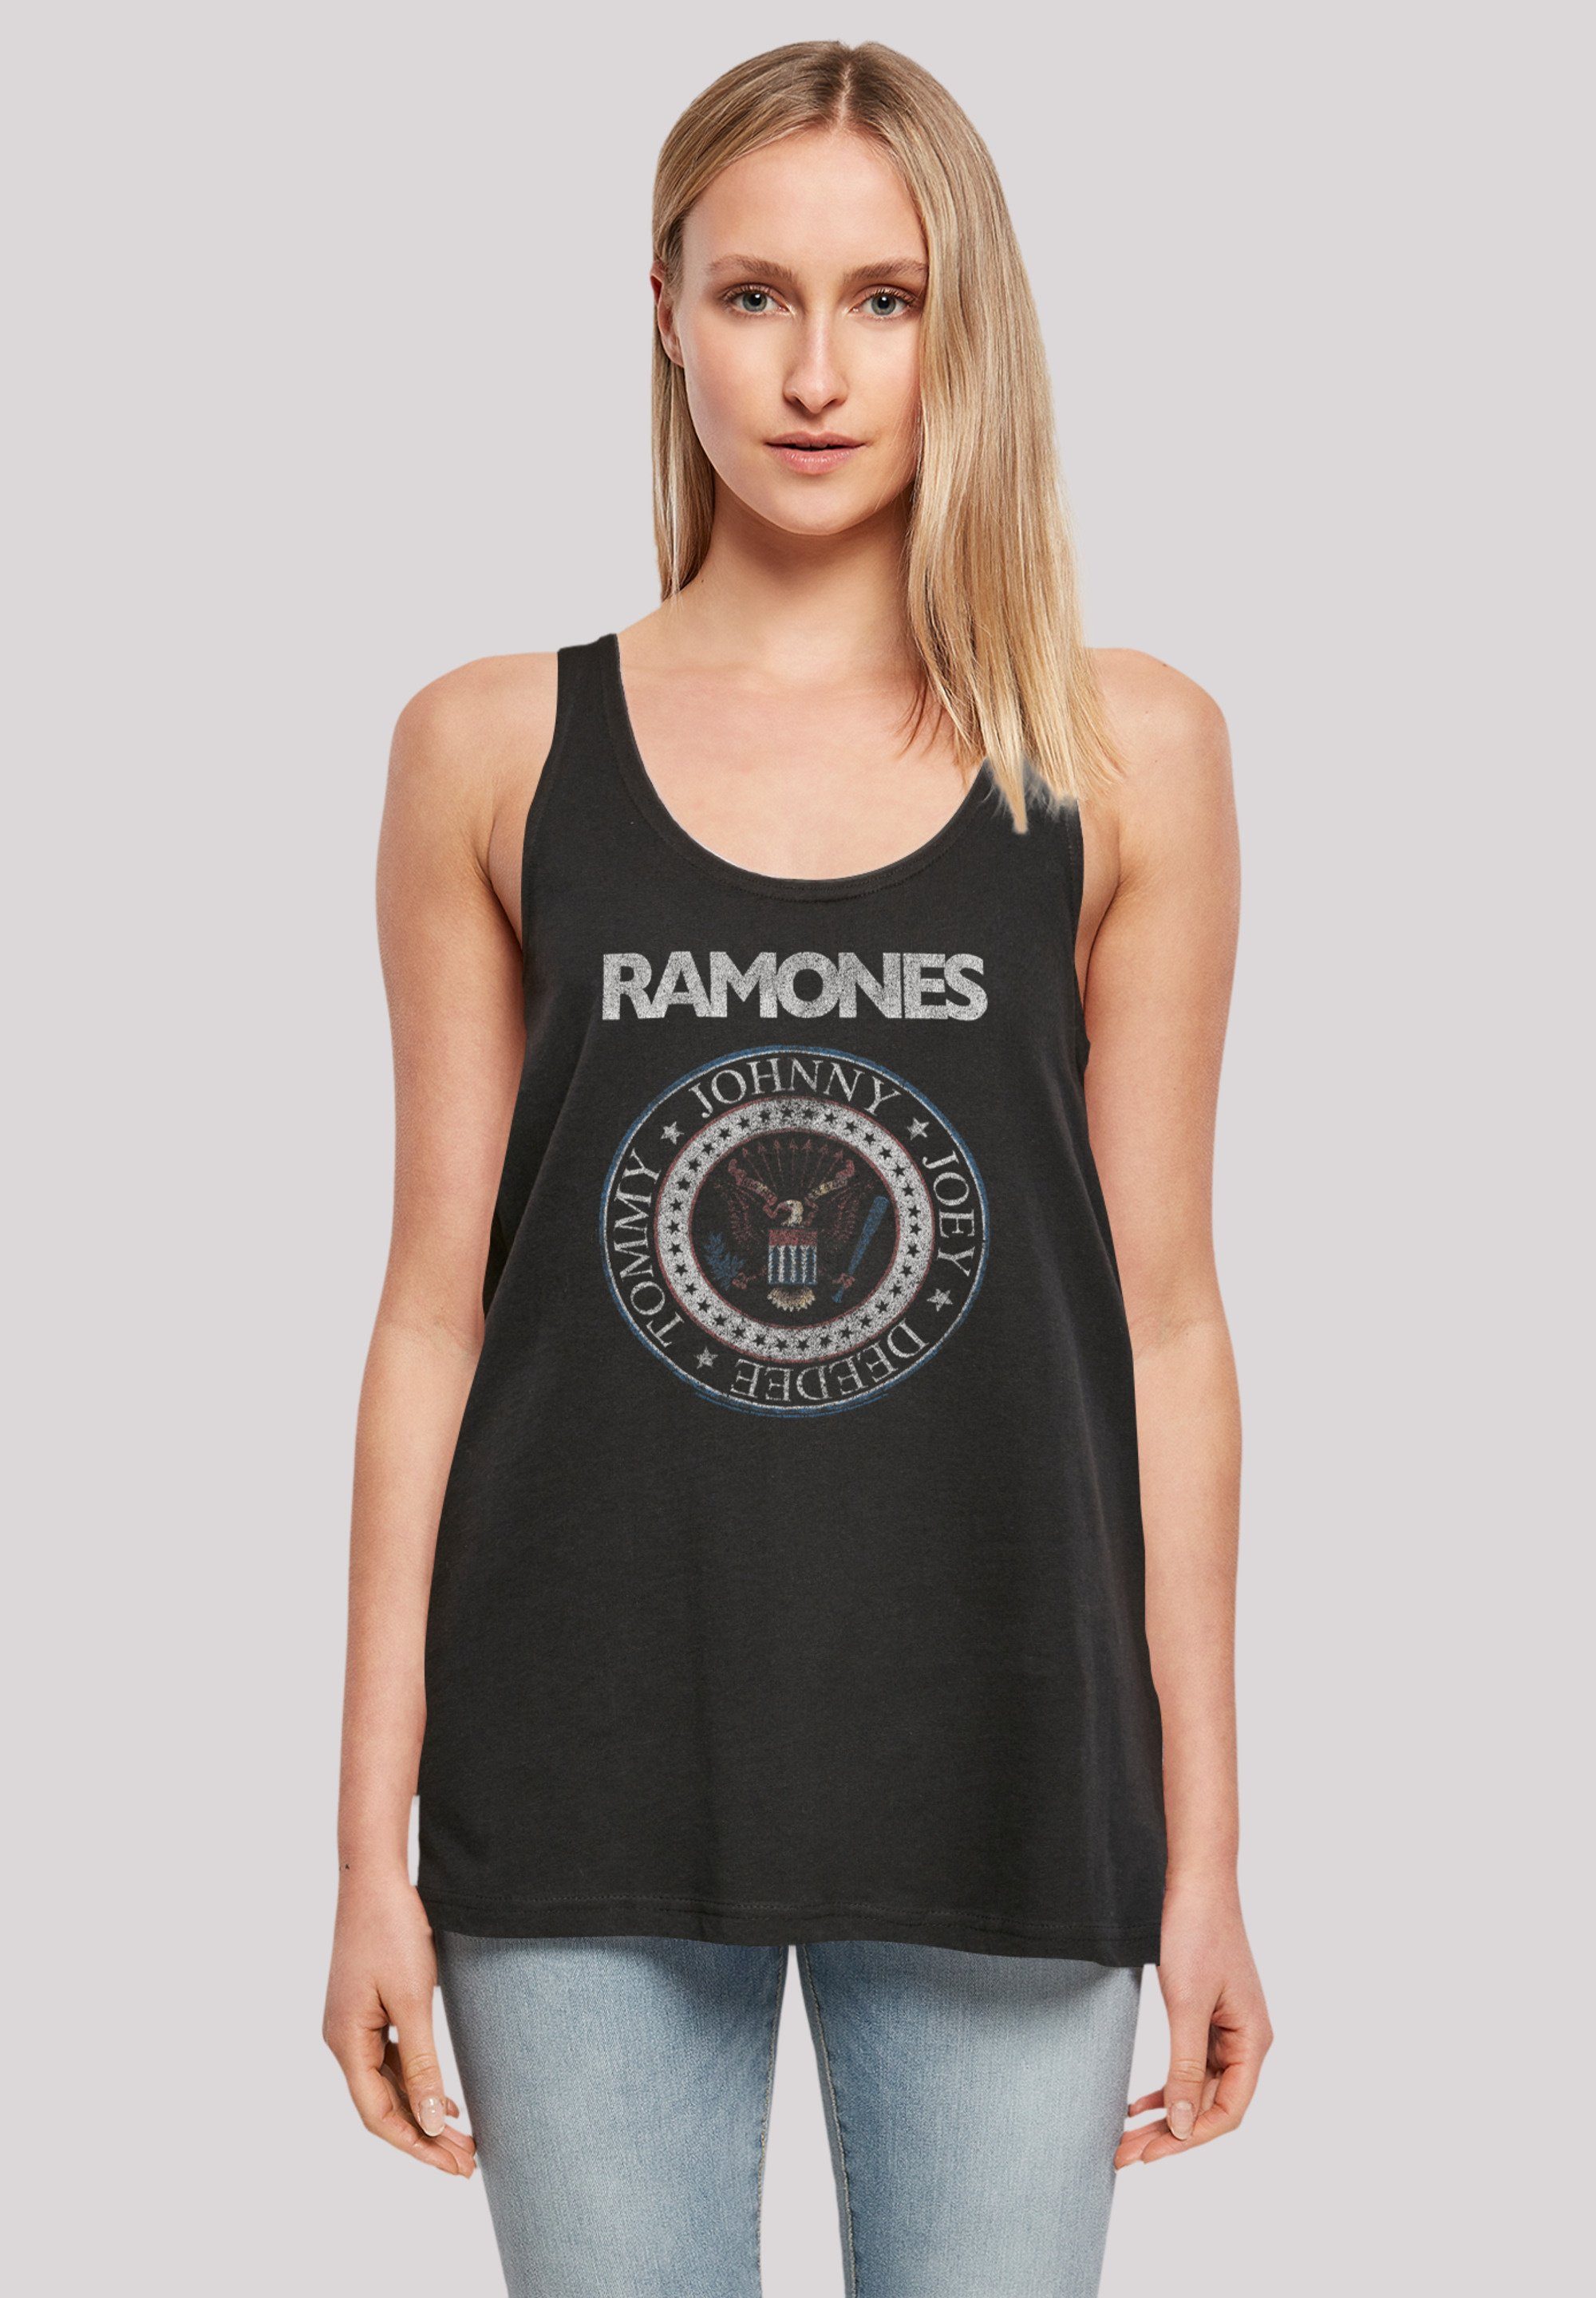 F4NT4STIC T-Shirt Ramones Rock Musik Band, White Band And Seal Rock-Musik Premium Qualität, Red